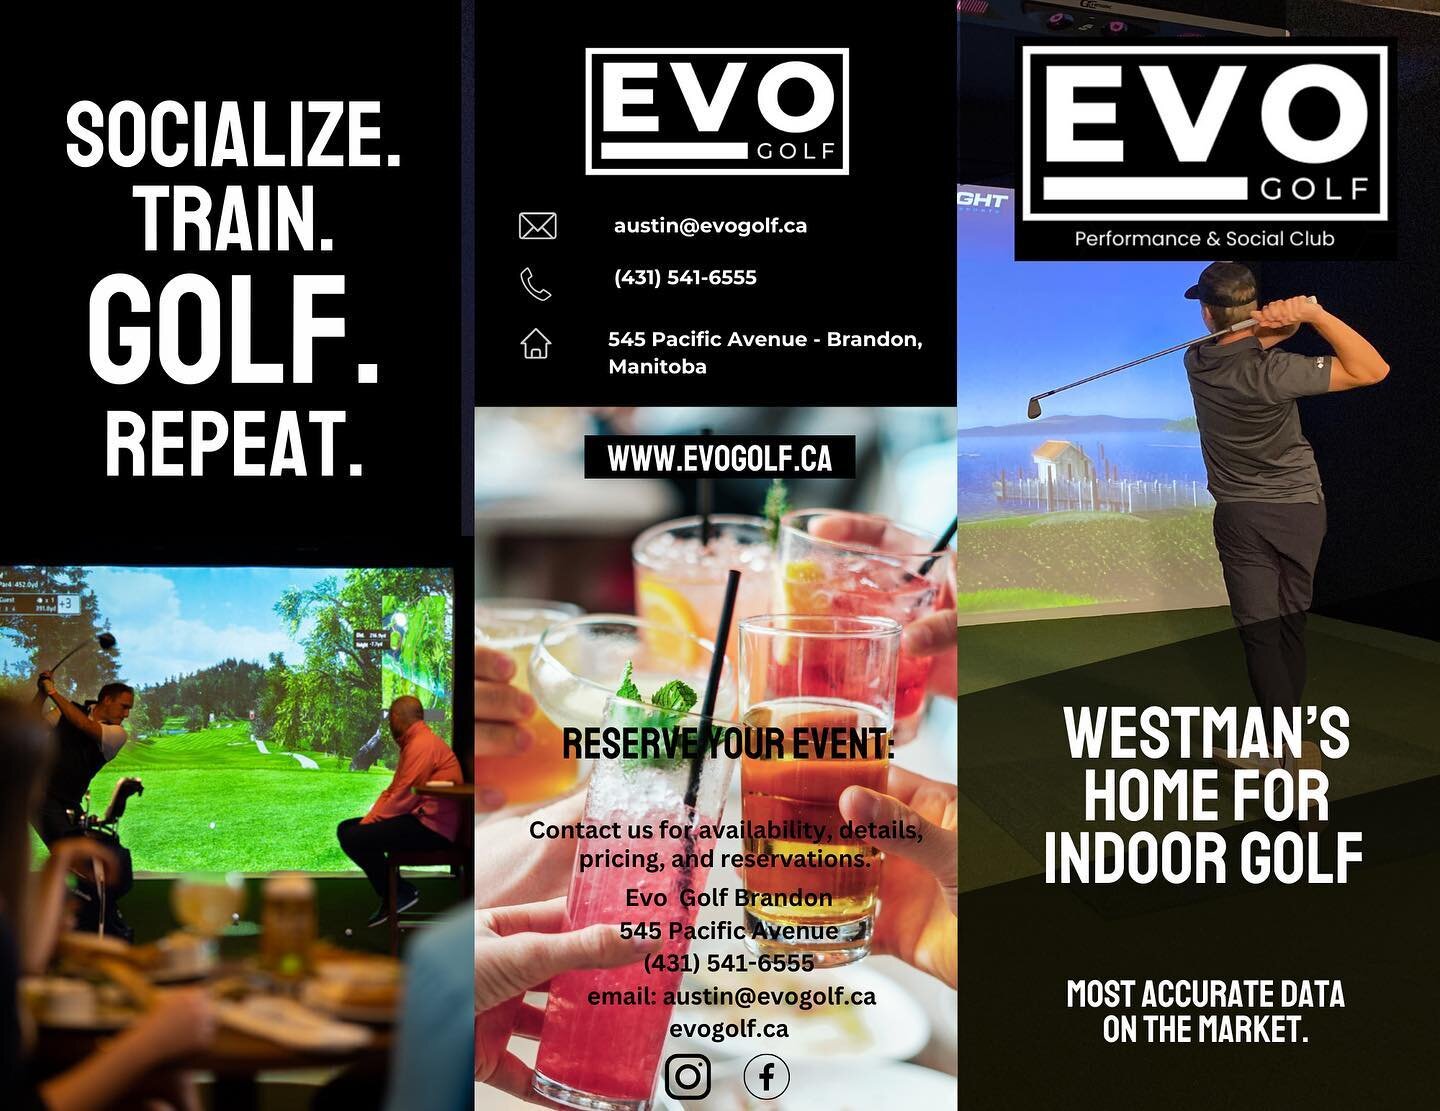 So close!! Evo is shaping up better than we imagined. Message us about all of our offers, memberships, bookings, leagues, or events. #evogolfbrandon